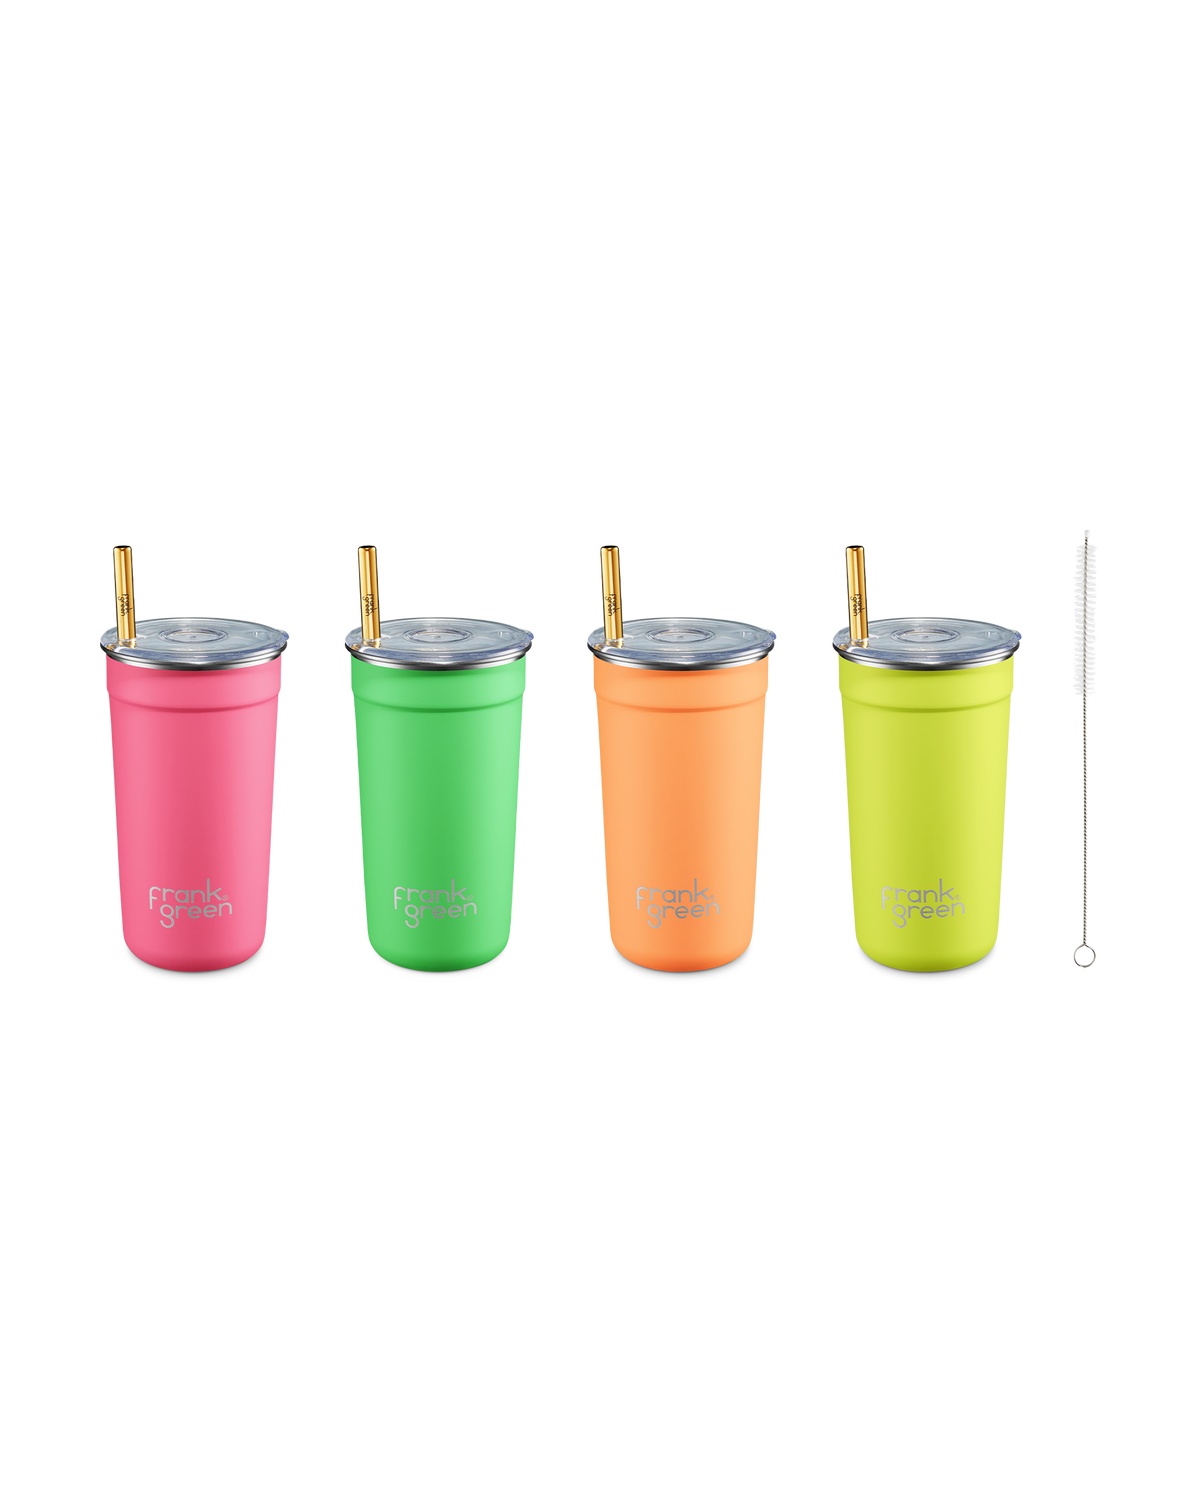 Reusable Party Cups - 16oz / 475ml (4 pack) - Neon